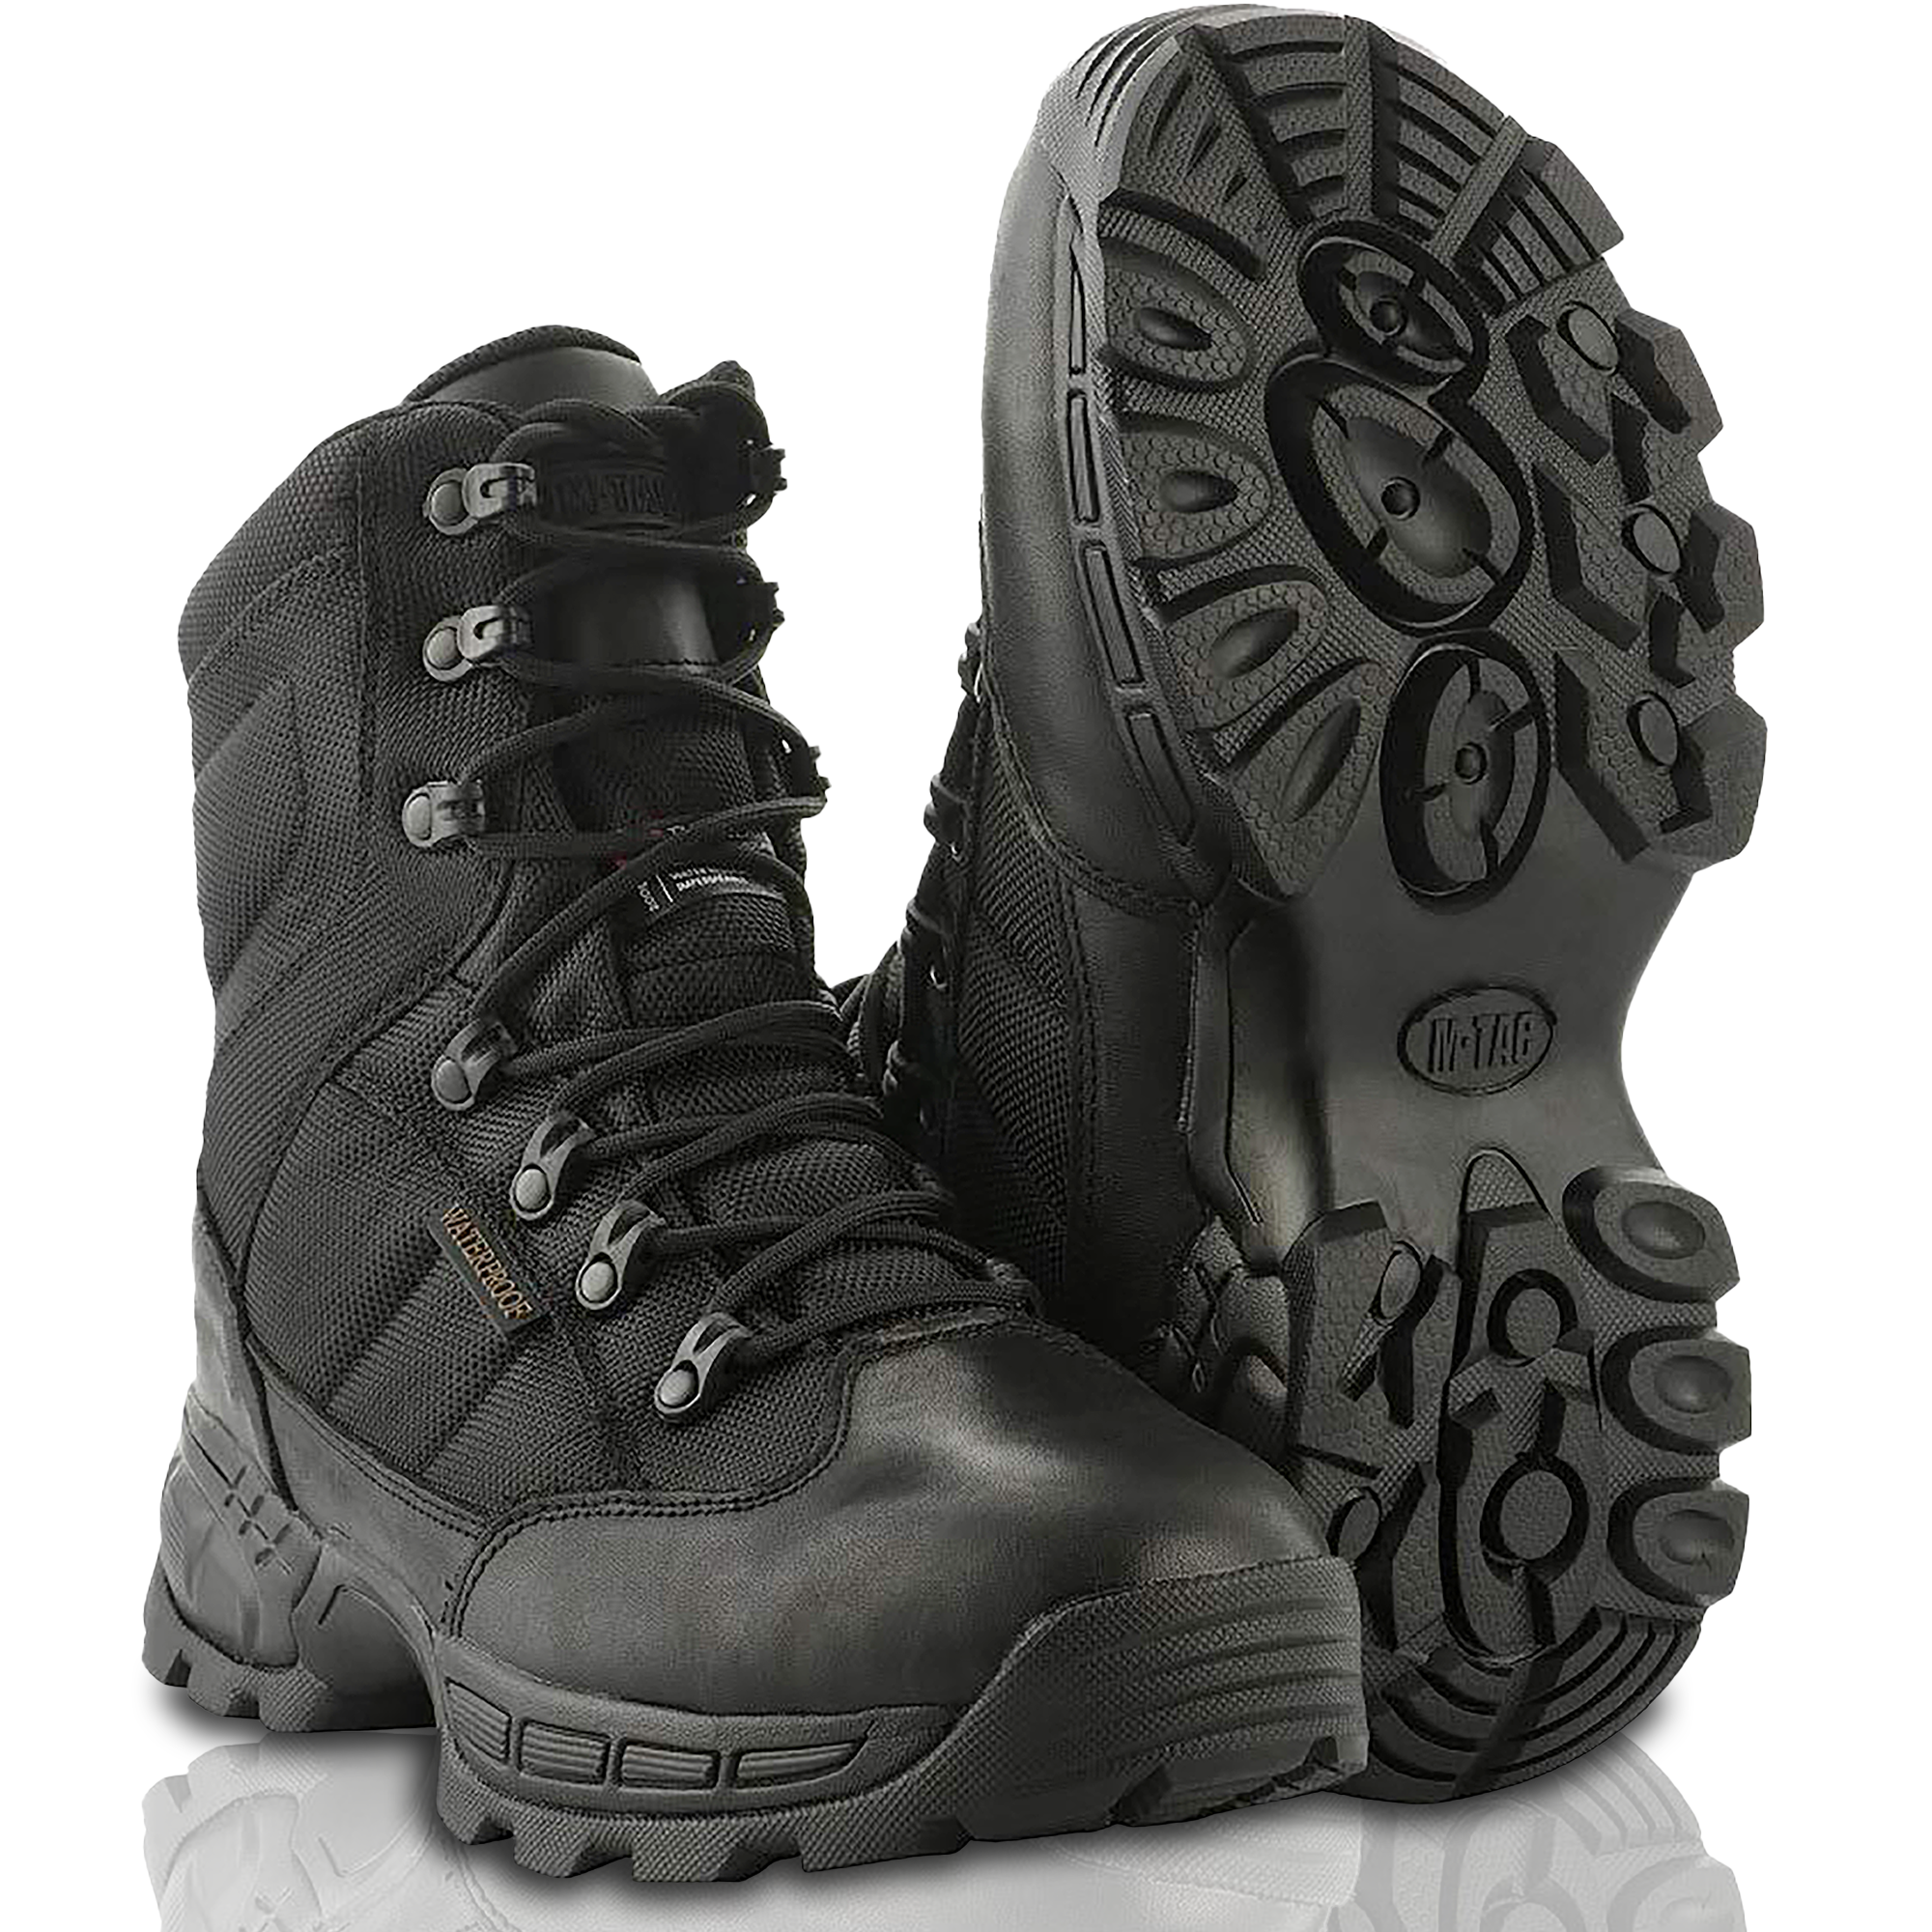 What Are Tactical Boots Used For?